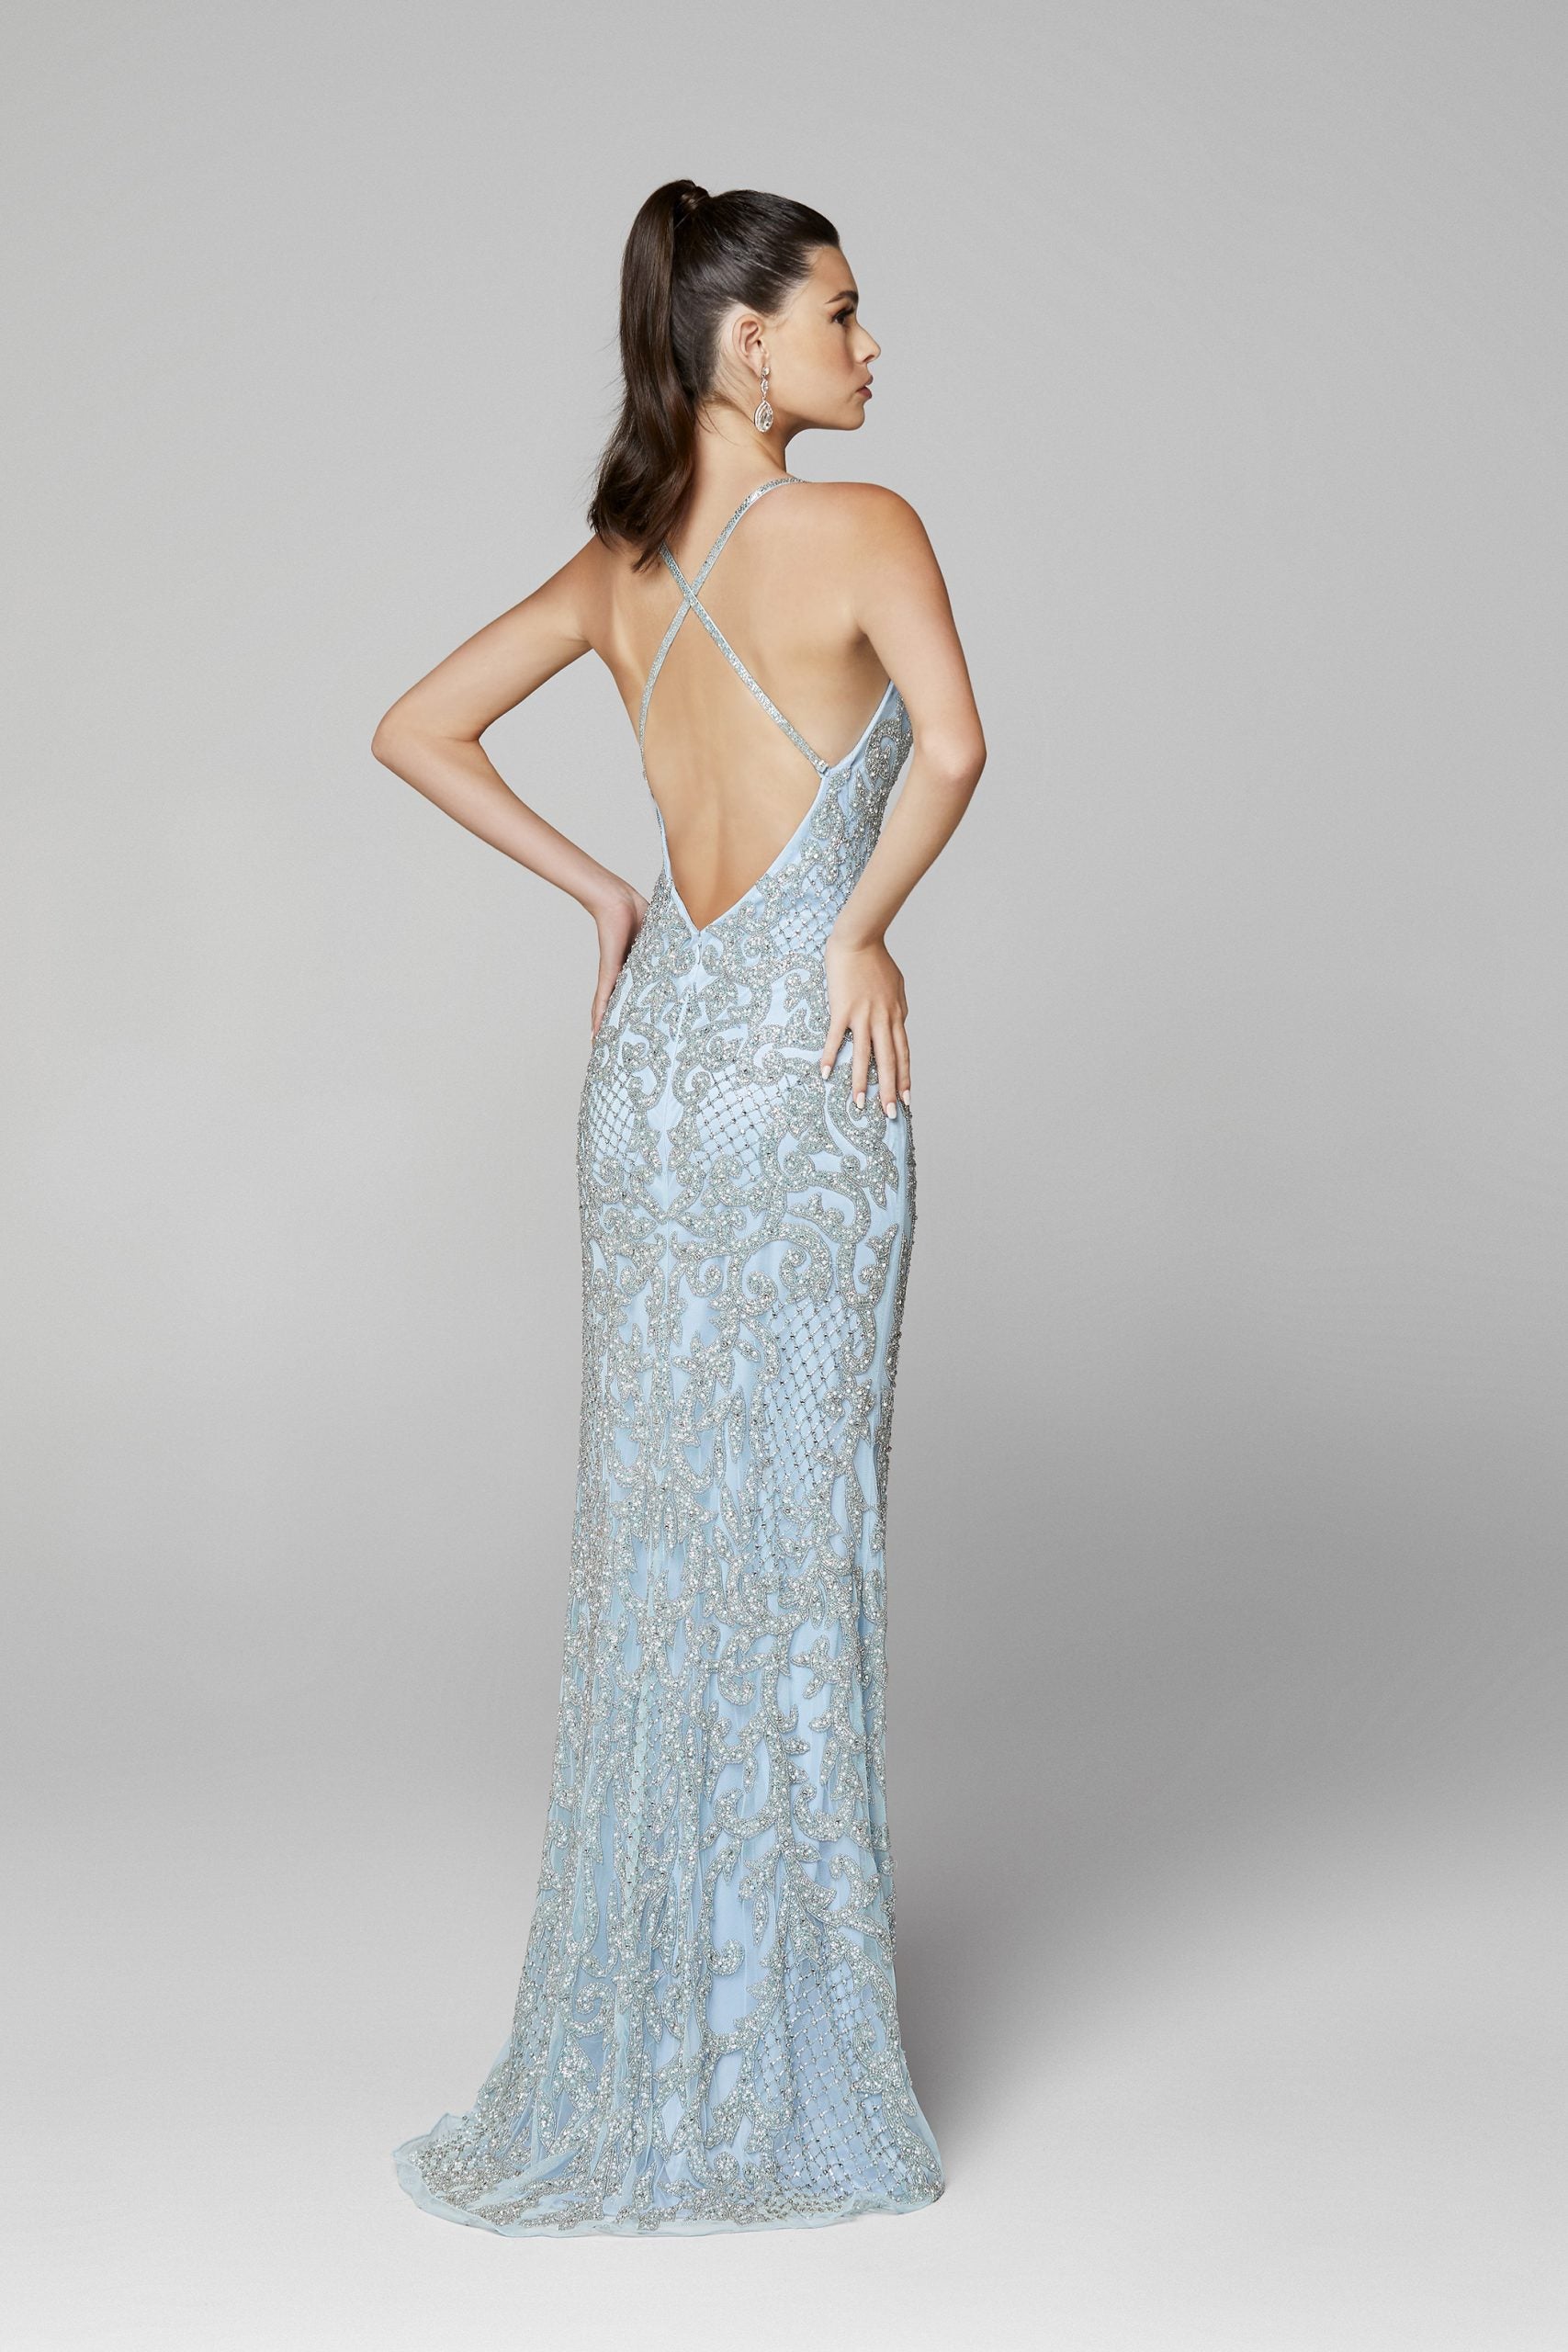 Primavera Couture 3214 Long Fitted Fully Beaded & Embellished formal evening gown. Prom Dress, Pageant Gown Evening gown. Backless with thigh slit and deep v neckline embellished spaghetti straps. v neckline criss cross back fully beaded prom dress with side slit. Great Wedding reception dress in Ivory!  Available Colors: YELLOW, FORREST GREEN, LILAC, POWDER BLUE, TEAL, BLUSH SILVER, RASPBERRY, IVORY, BLACK, BURGUNDY, MIDNIGHT  Available Sizes: 00-18